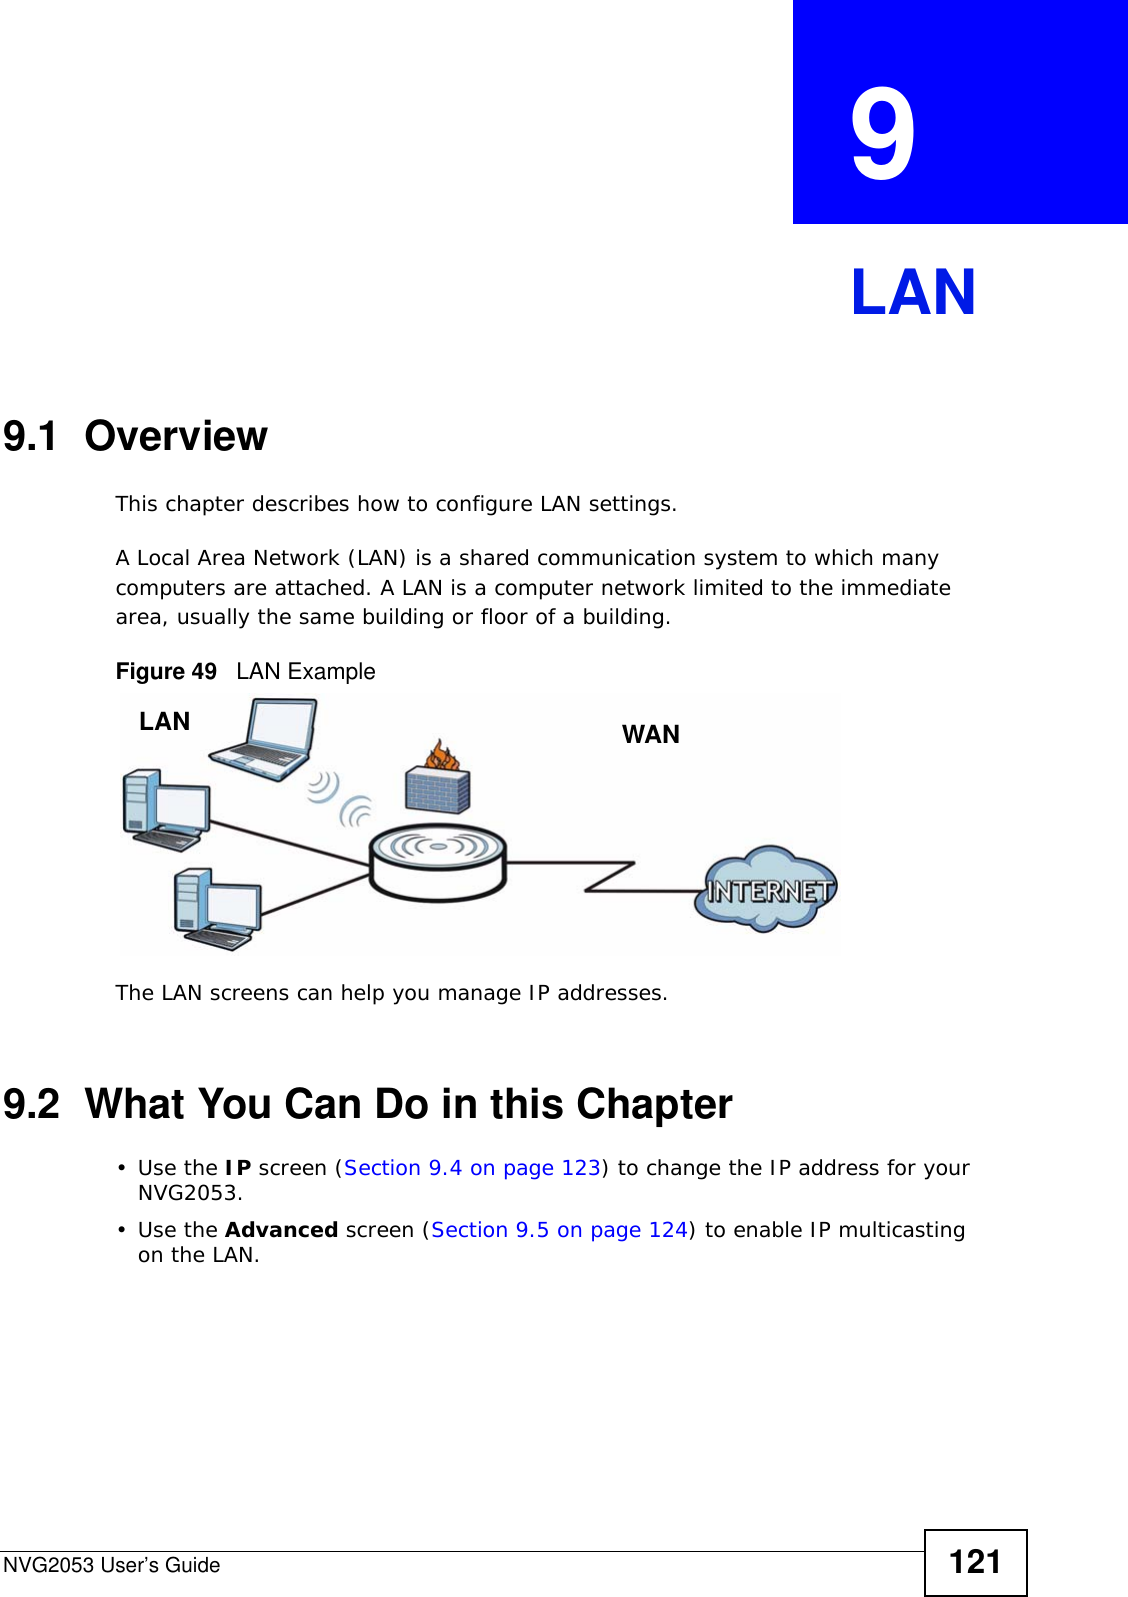 NVG2053 User’s Guide 121CHAPTER  9 LAN9.1  OverviewThis chapter describes how to configure LAN settings.A Local Area Network (LAN) is a shared communication system to which many computers are attached. A LAN is a computer network limited to the immediate area, usually the same building or floor of a building. Figure 49   LAN ExampleThe LAN screens can help you manage IP addresses.9.2  What You Can Do in this Chapter•Use the IP screen (Section 9.4 on page 123) to change the IP address for your NVG2053.•Use the Advanced screen (Section 9.5 on page 124) to enable IP multicasting on the LAN.LAN WAN